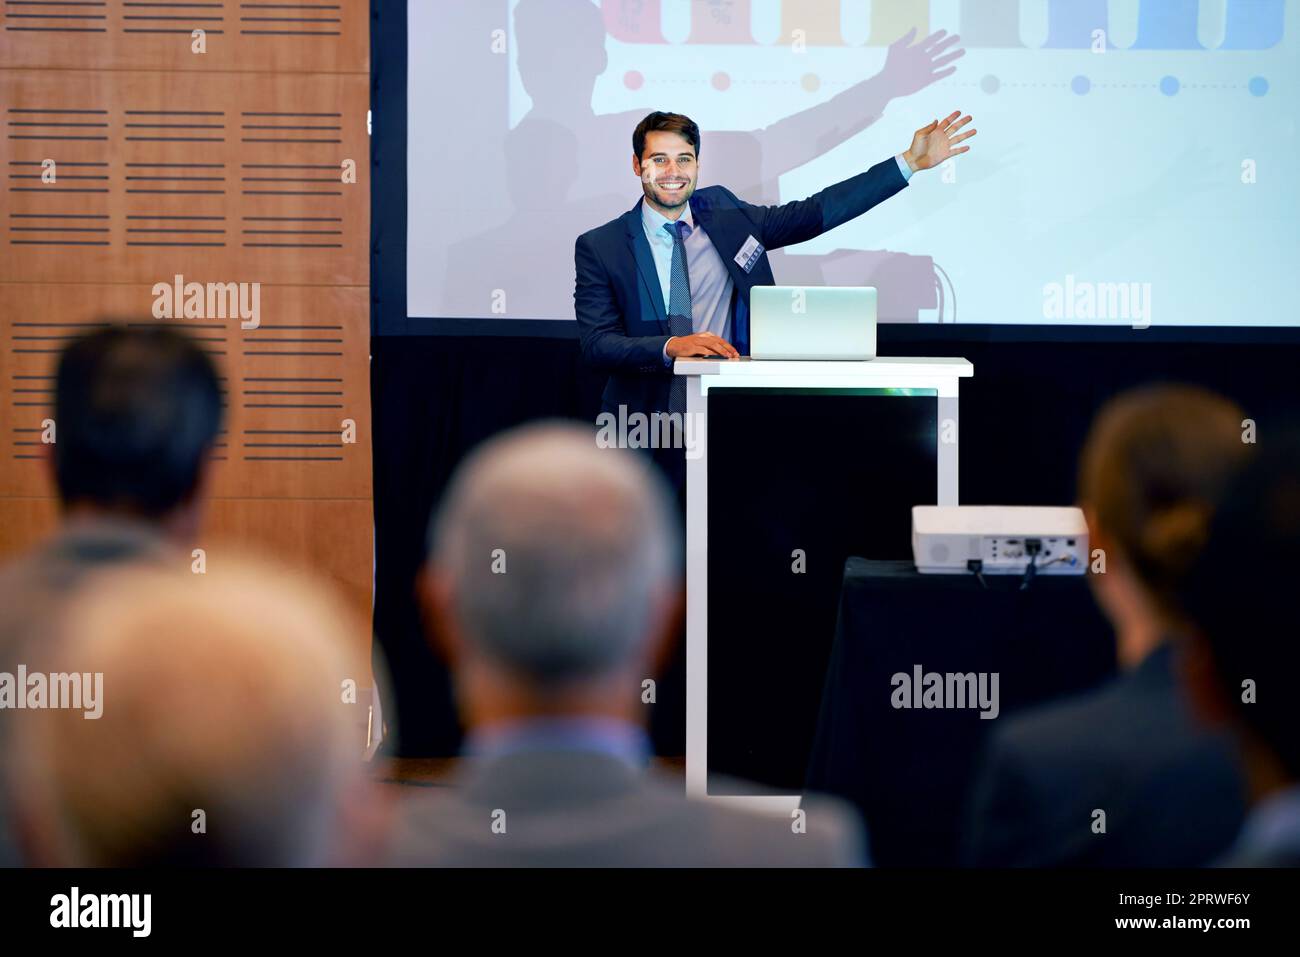 Confidence and charisma. An excited businessman gesturing while giving a presentation at a press conference. Stock Photo